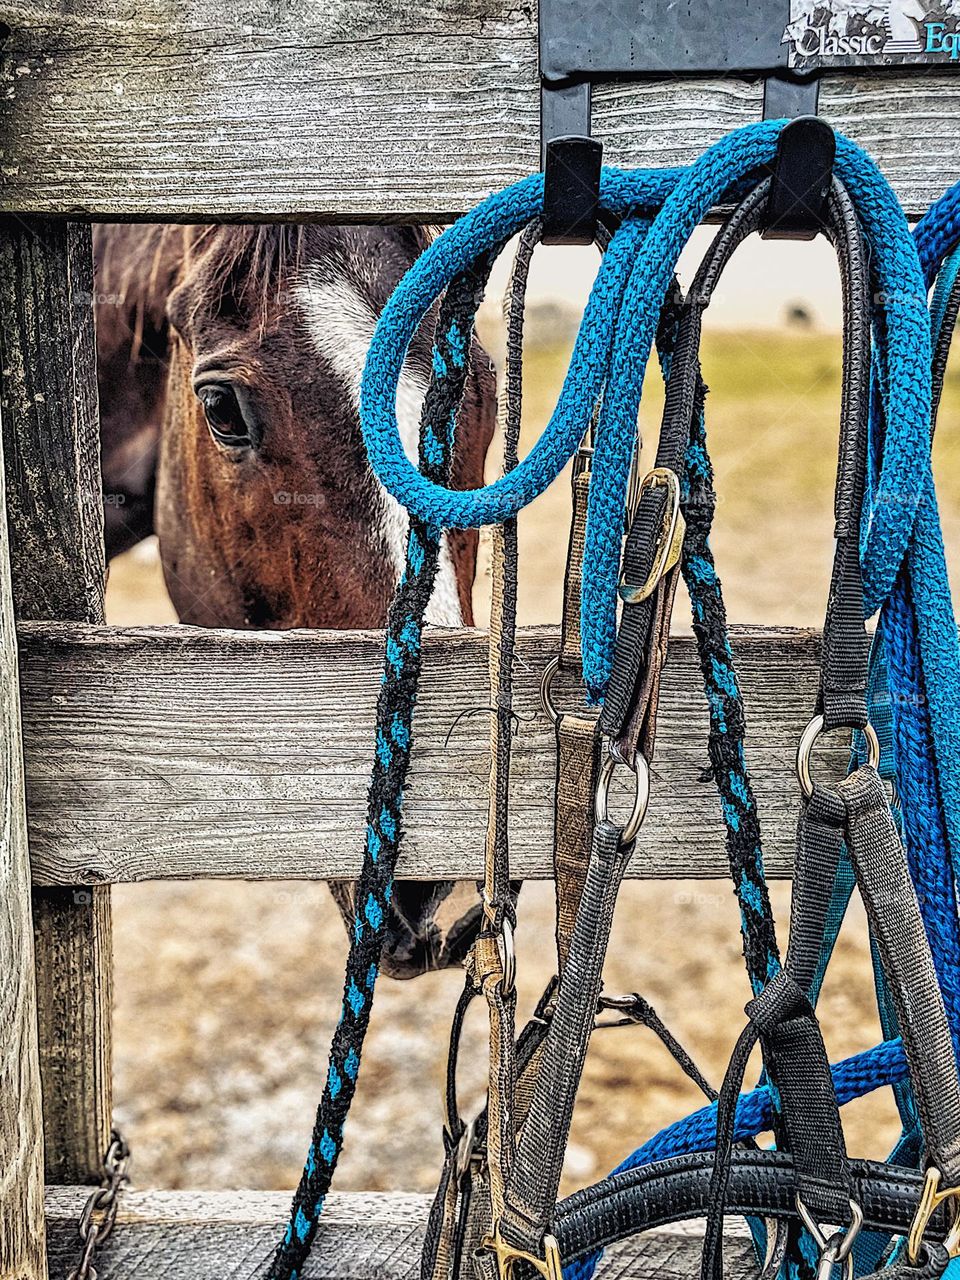 Horse peeking through leads on fence, time with horses is peaceful, finding time to enjoy the farm, quiet time with horses, finding peace with animals, glimmers of hope with horses 